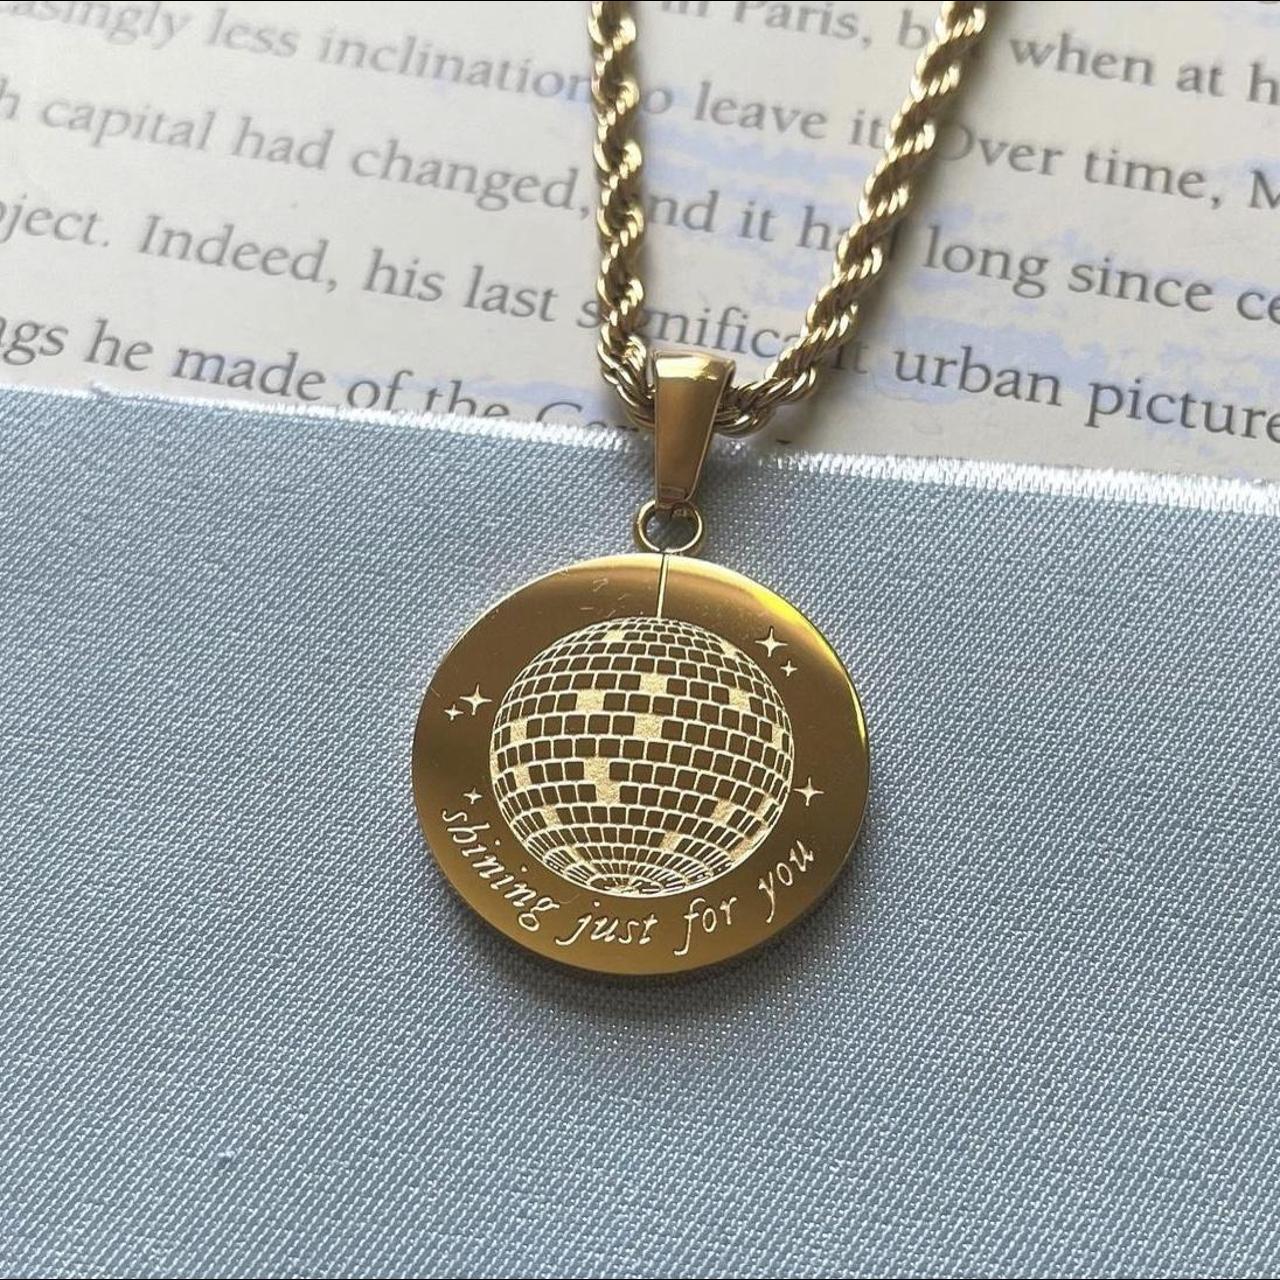 Taylor in My Folklore Era 30mm Pendant Charm Necklace Betty Cardigan Seven  Mirrorball Exile the 1 August Hoax Peace Mad Woman PERFECT GIFT - Etsy